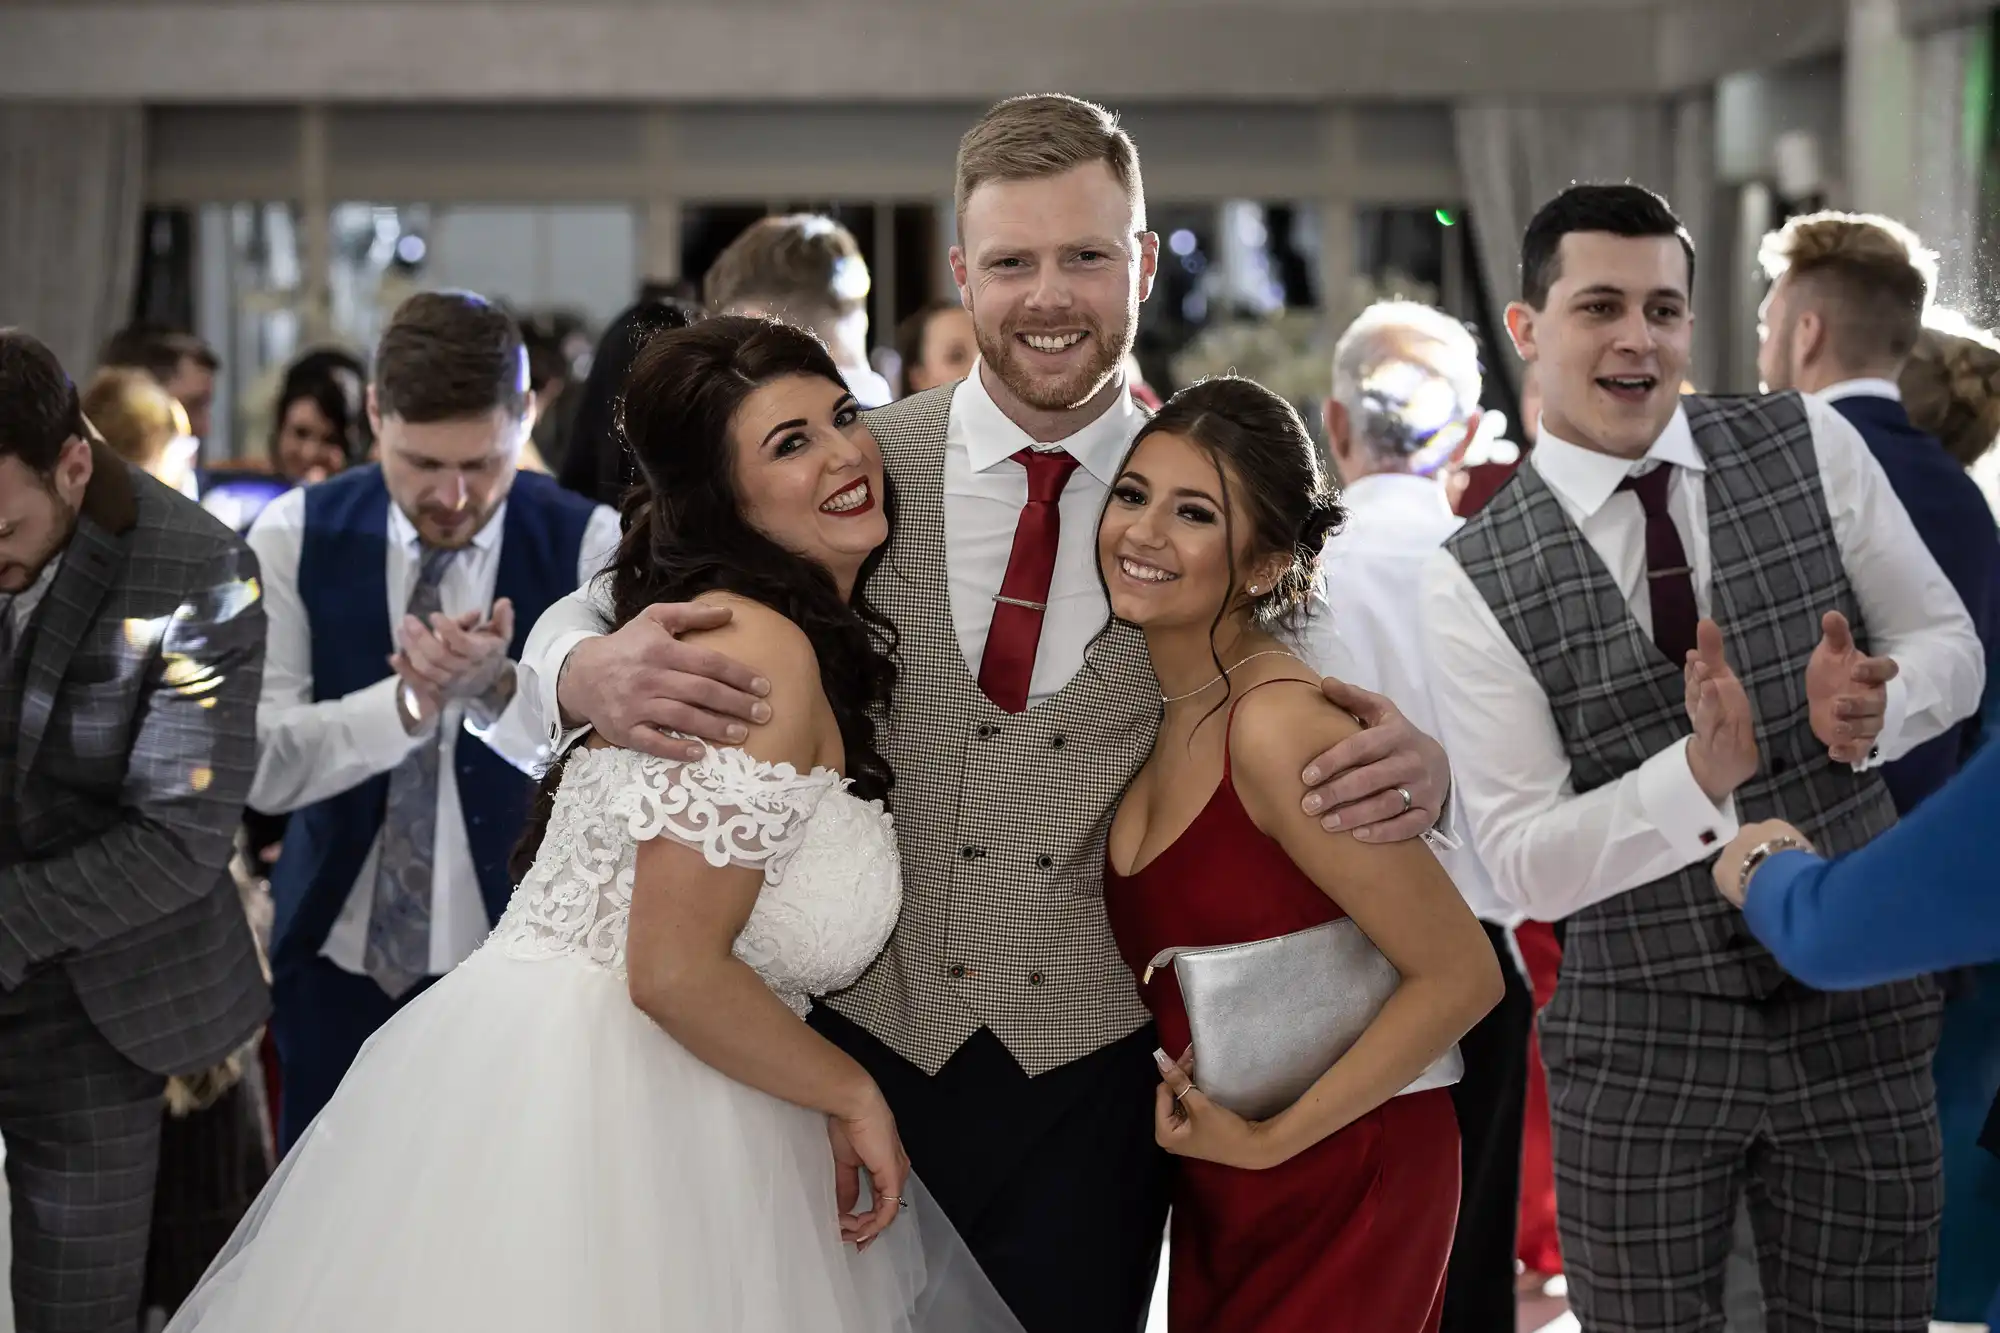 Three people in formal attire, one in a wedding dress, another in a vest with a tie, and the third in a red dress, pose together indoors. Others in the background are clapping and dancing.